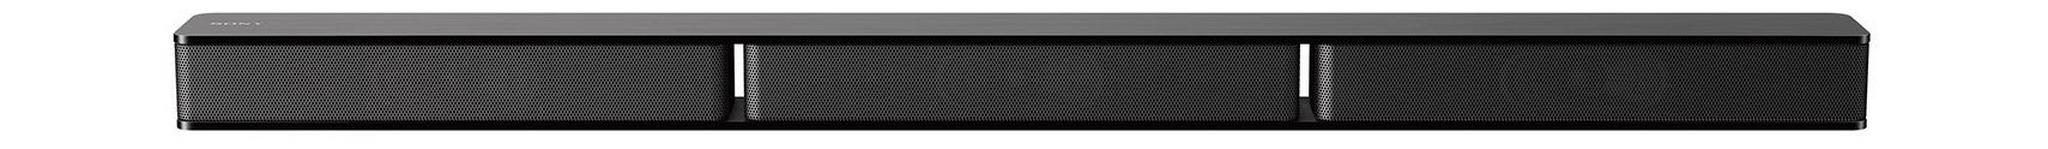 Sony HT-RT40 5.1 Channel 600 Watts Bluetooth Home Theater System - Black